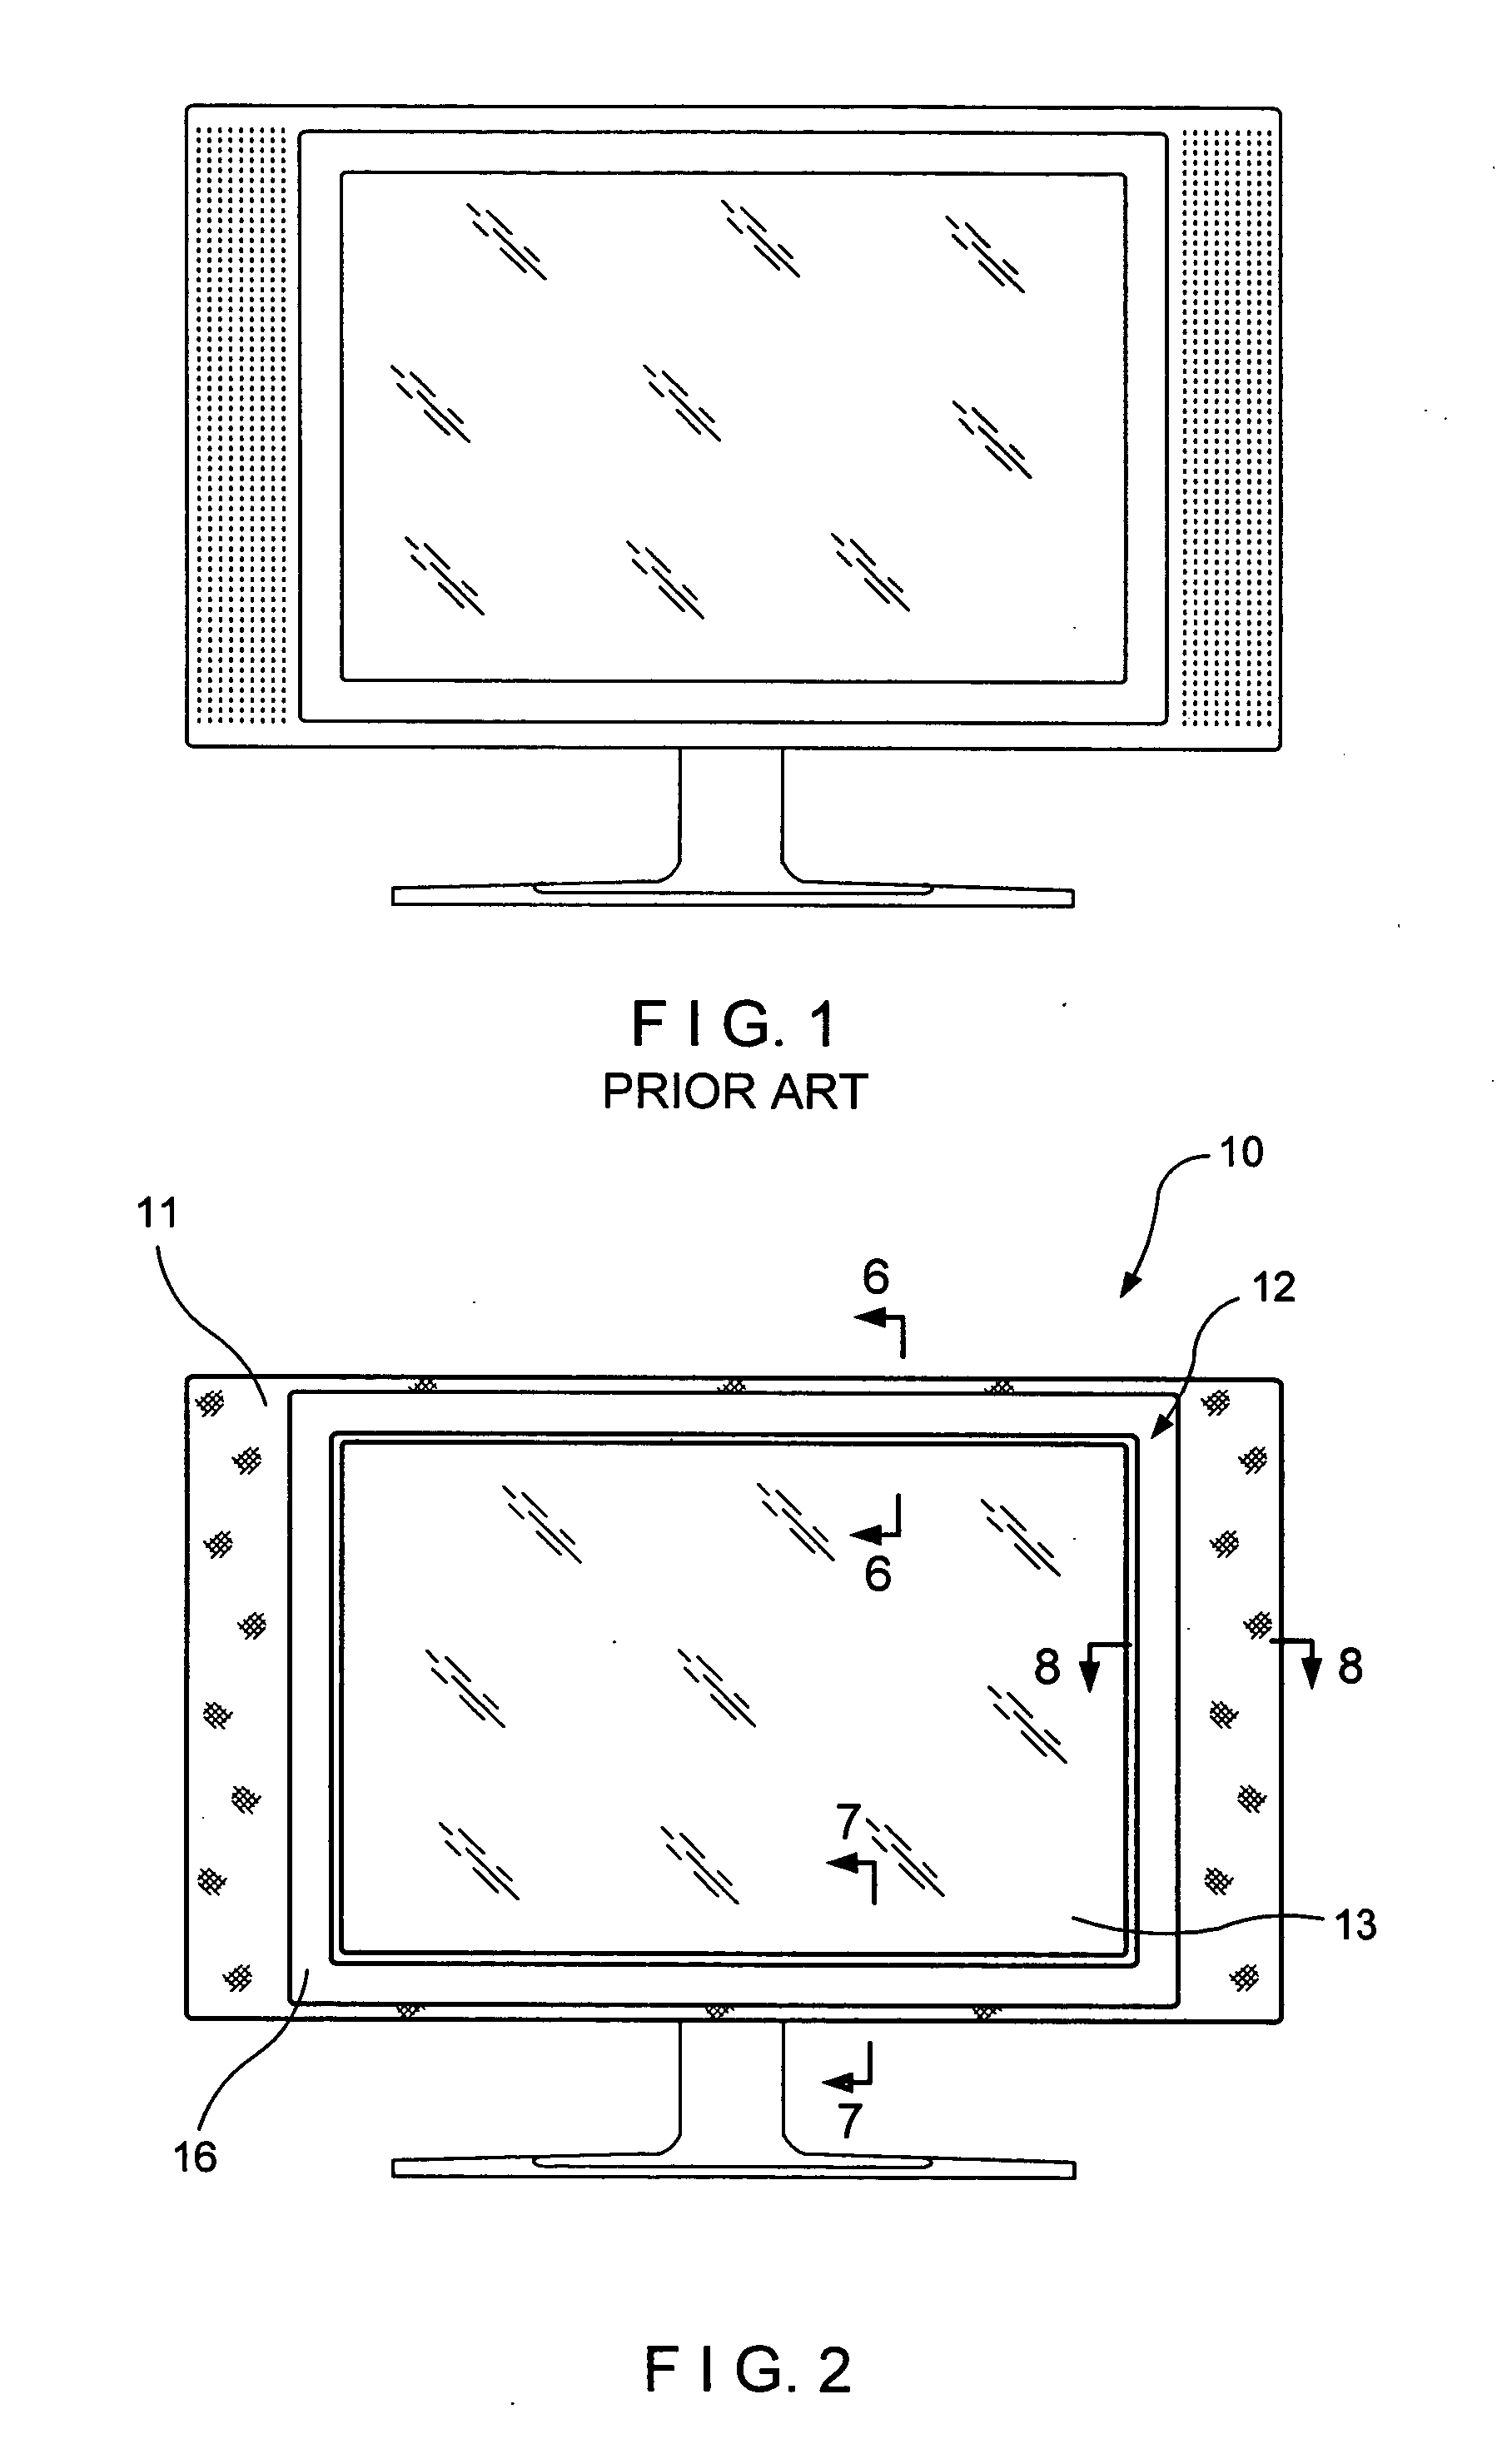 Decorative assembly for decorating a thin panel display screen